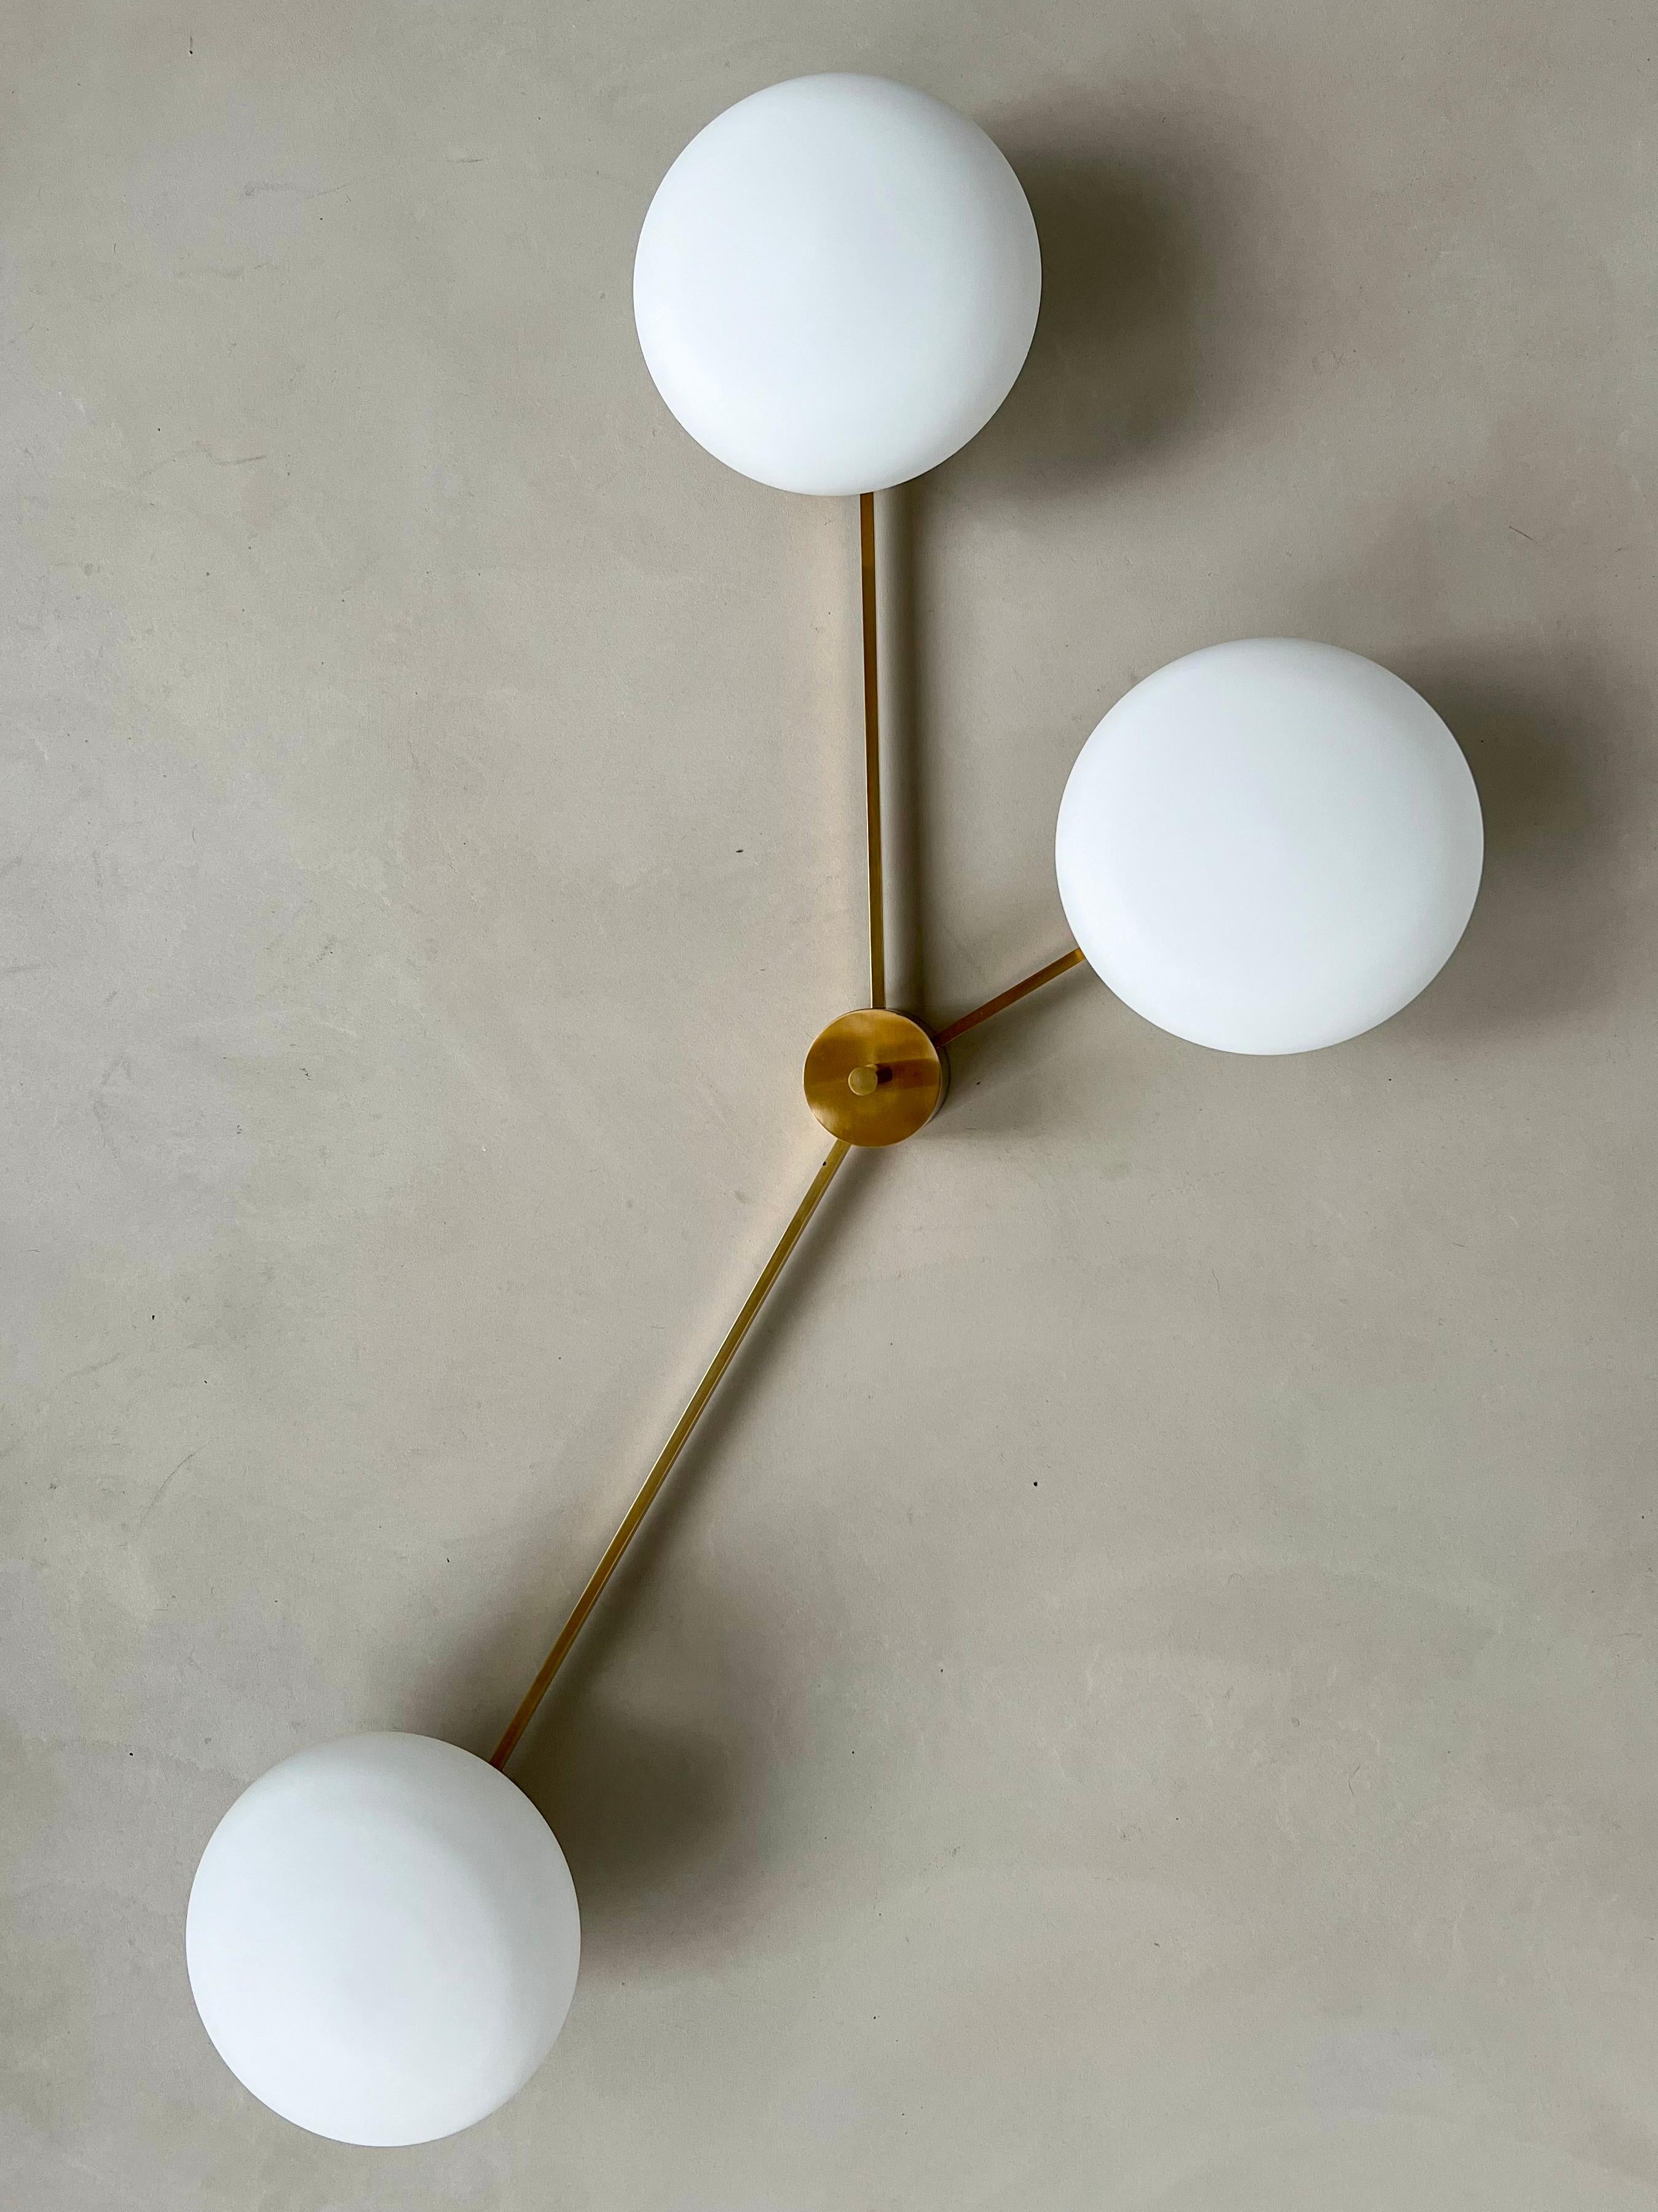 Vintage Mid Century Italian Chandelier

Chandelier / ceiling light in brass with three arms and three opaline glass shades. Has a nice patina developed over time. It measures 135cm by 85cm, and when mounted has an overall depth of 30cm. It is in